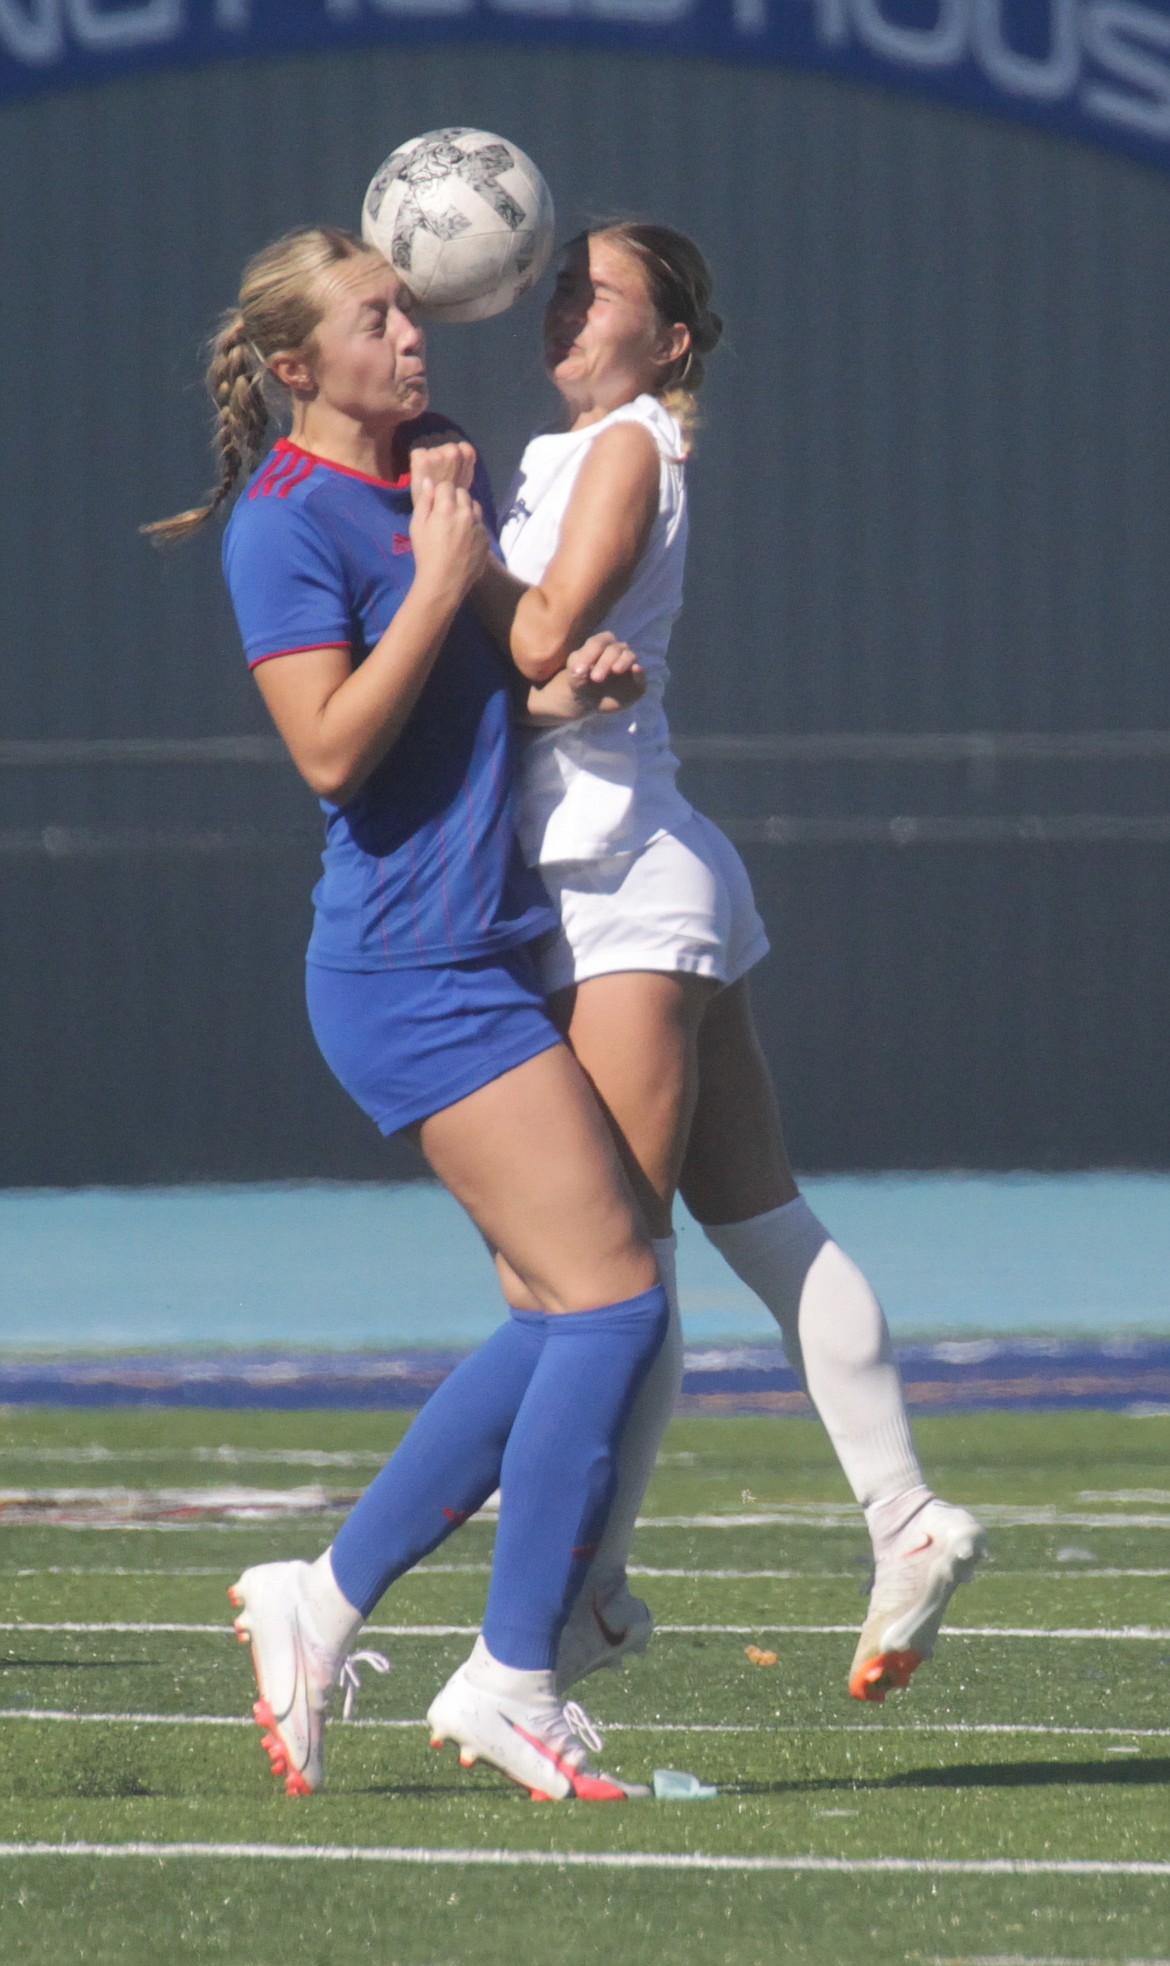 MARK NELKE/Press
Gianna Callari, left, of Coeur d'Alene and Taylor Miller of Lake City vie for a header during Saturday's 5A Region 1 girls soccer semifinal at Coeur d'Alene High.